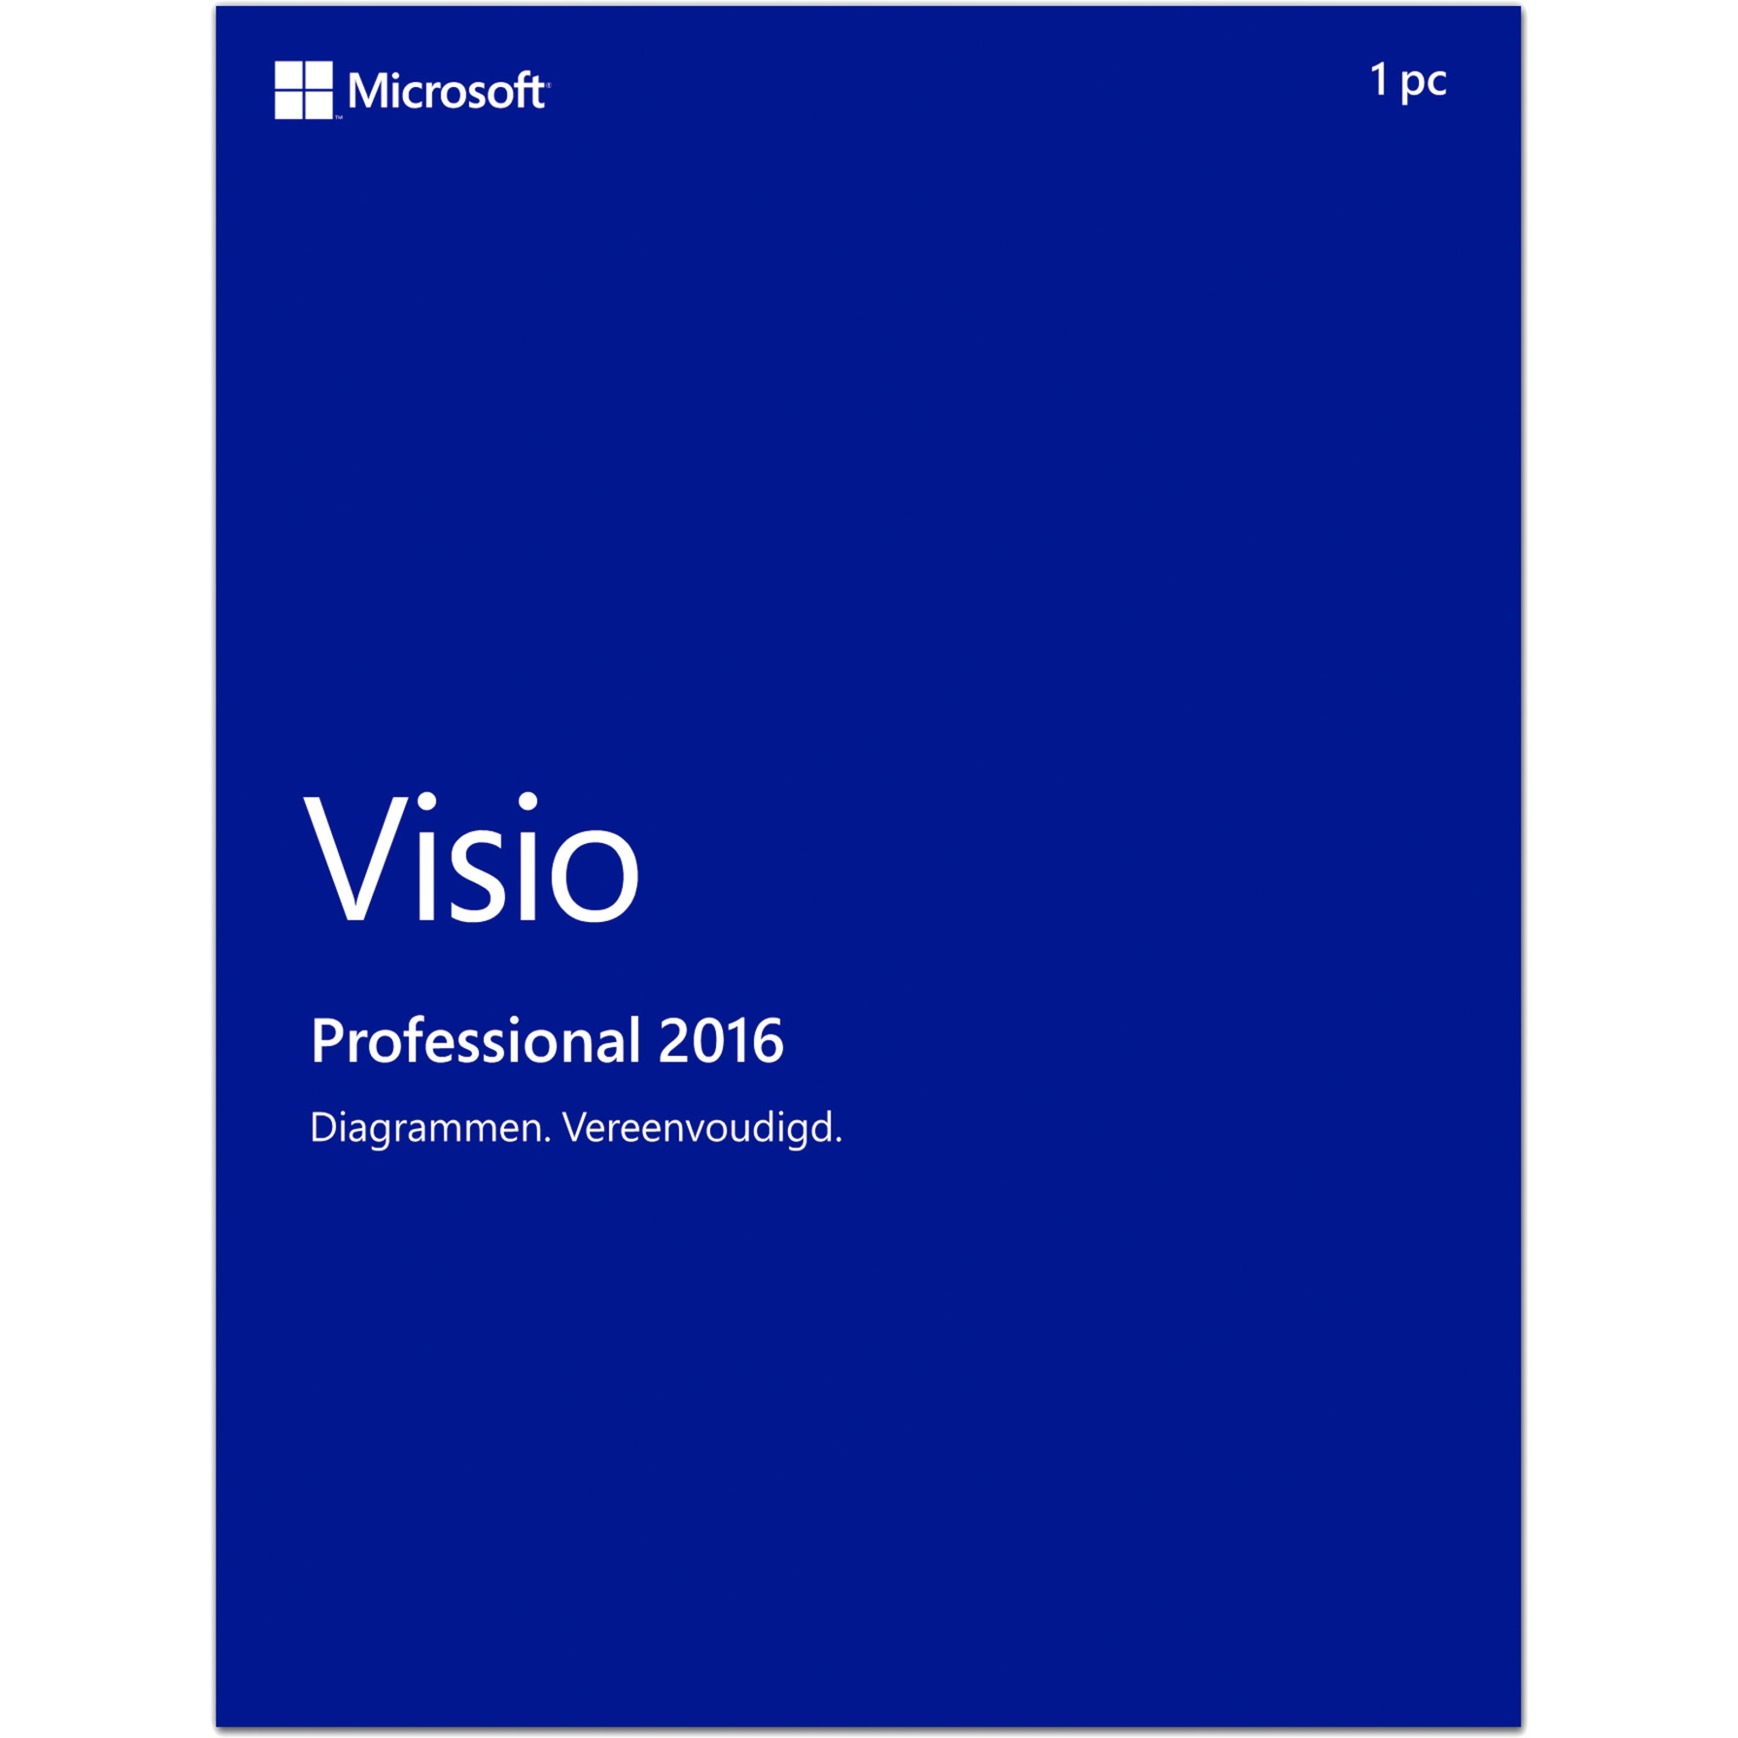 Microsoft office 2016 professional including working serial keys